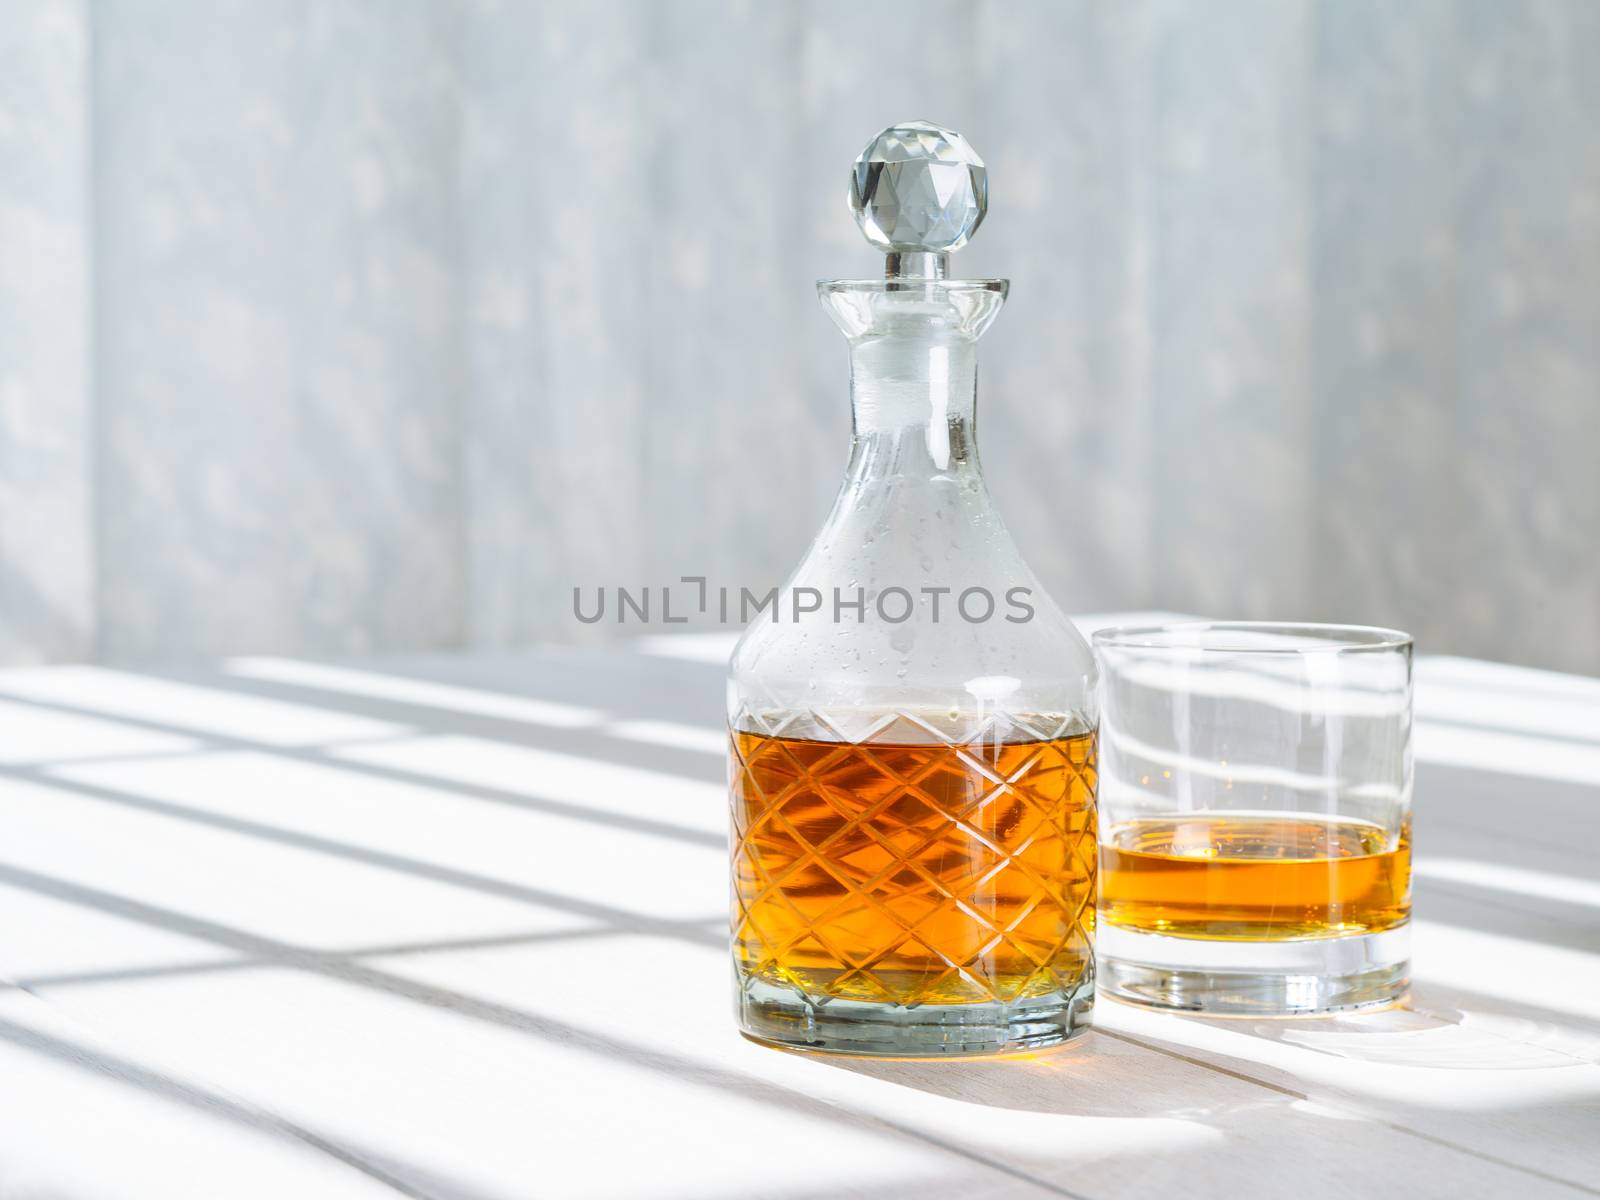 Photo of a whisky decanter and rocks glass on a table by a window.
